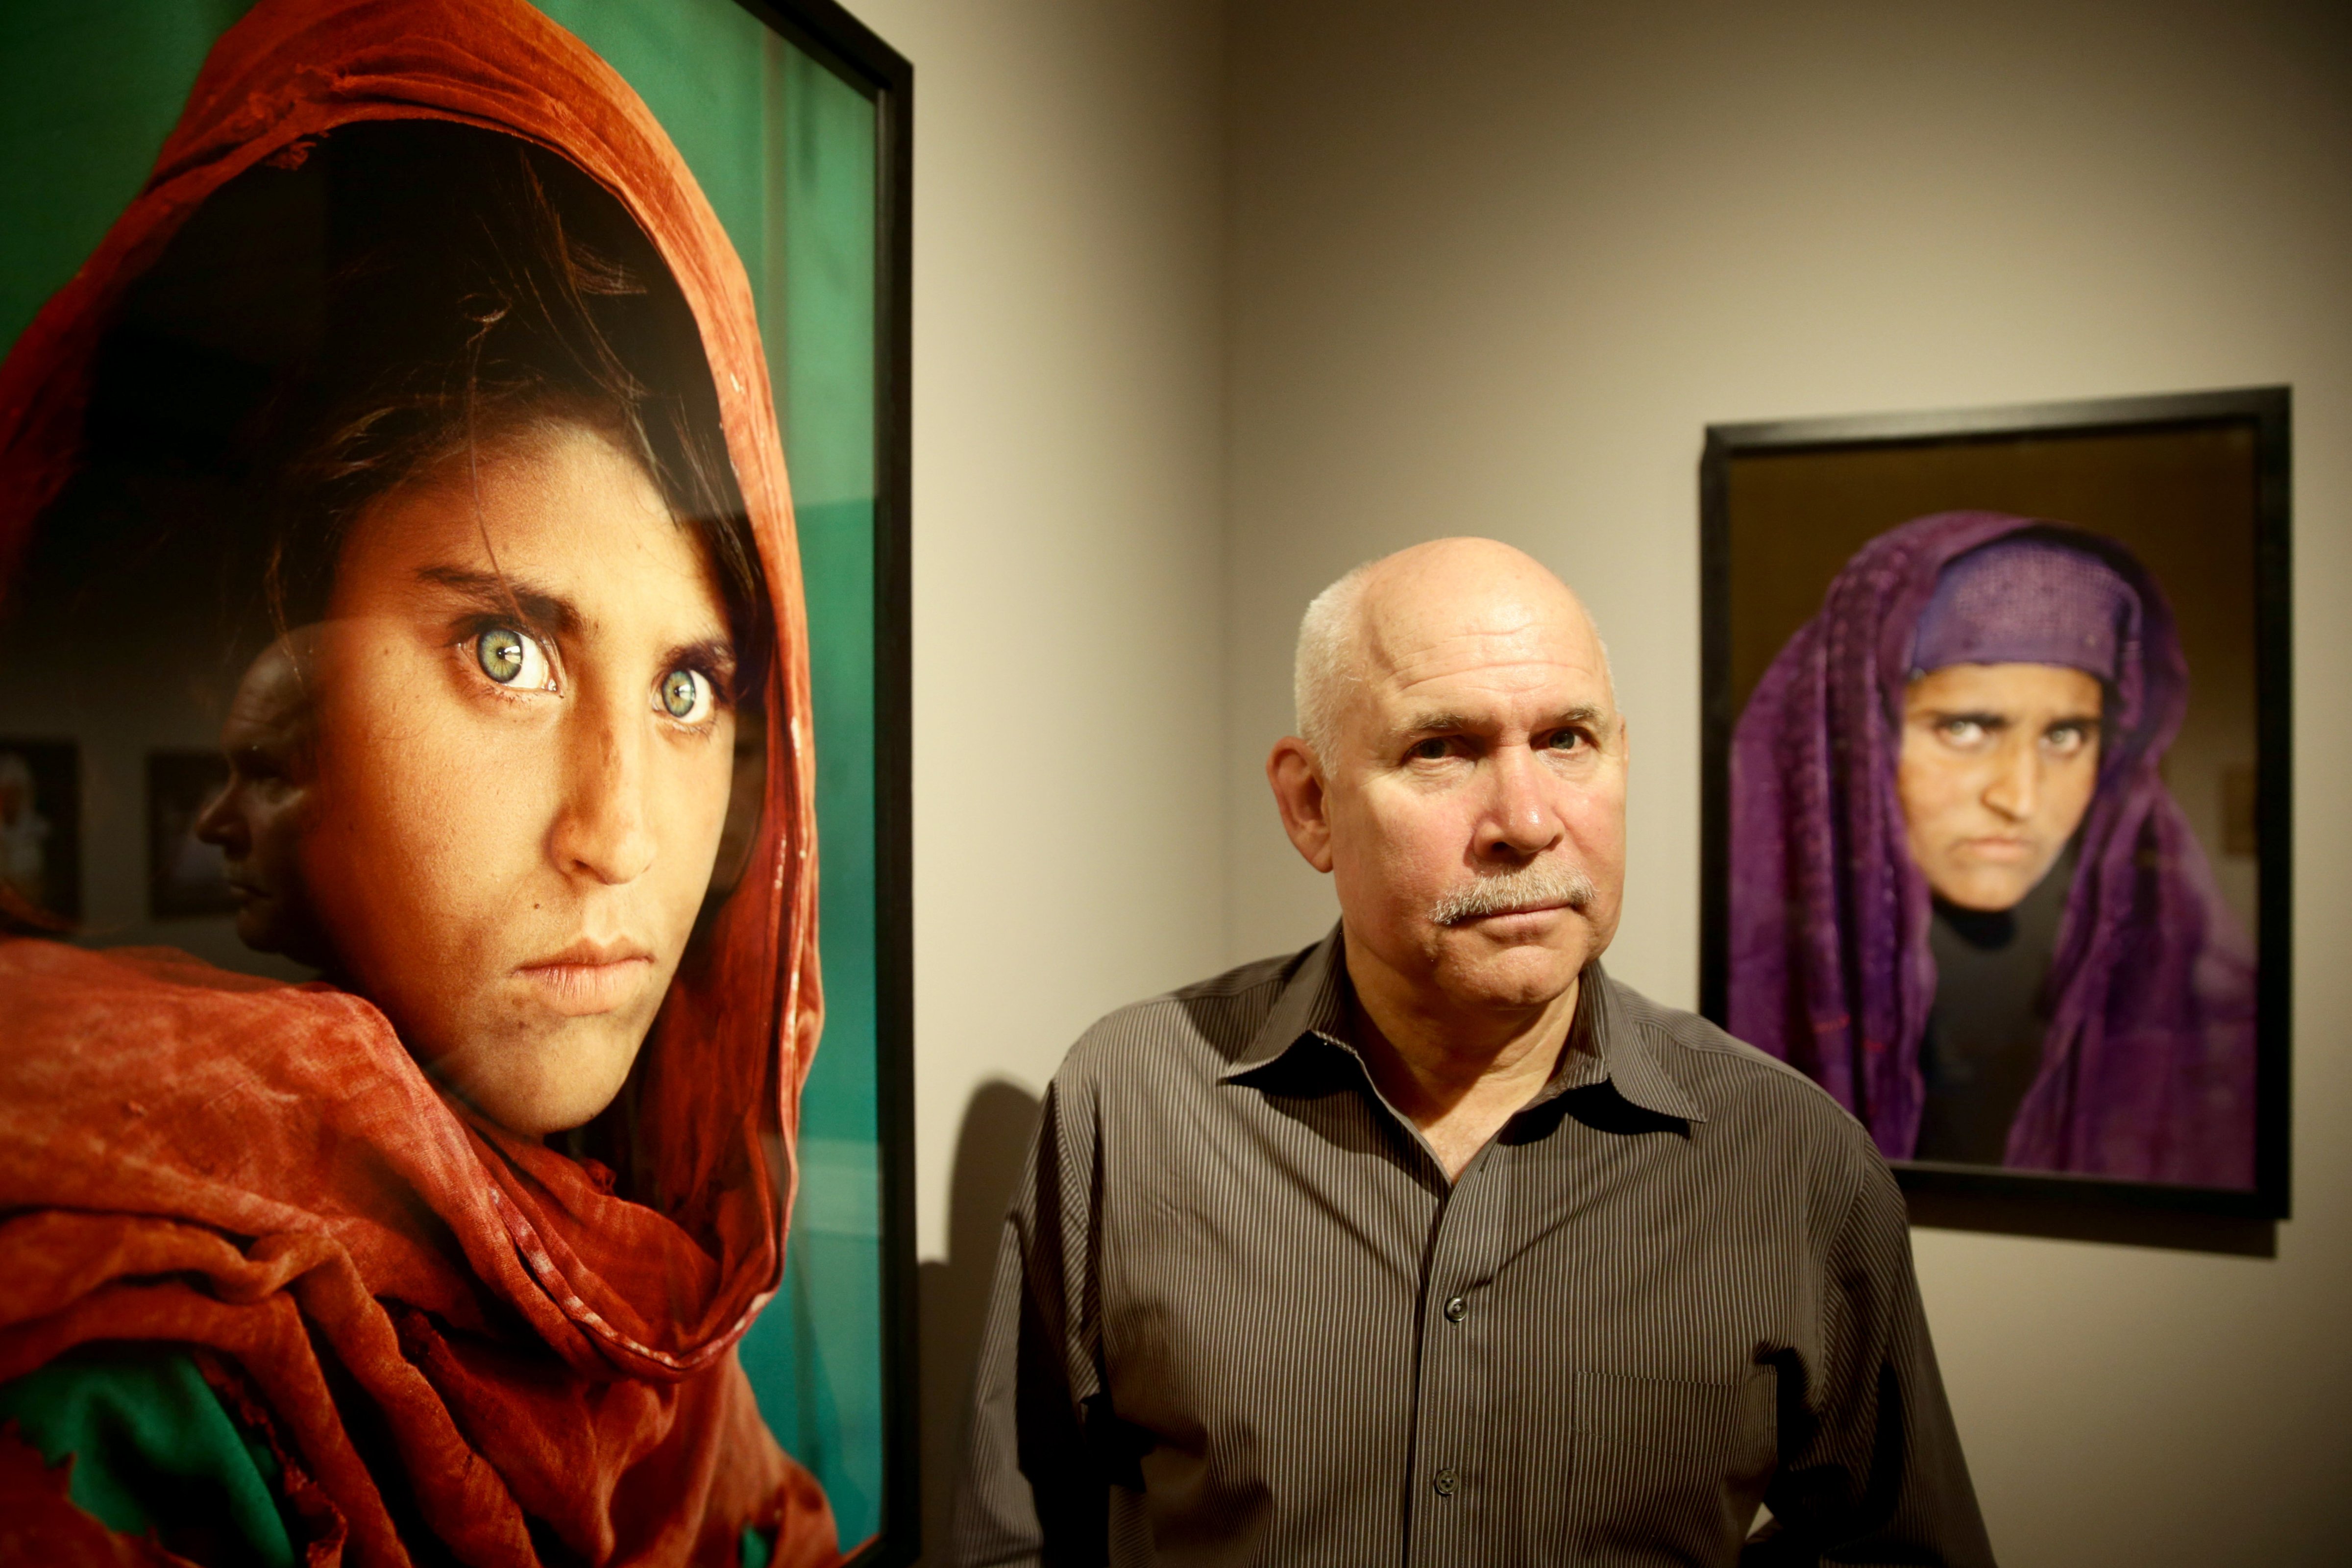 Steve McCurry poses next to his photos of the "Afghan Girl" named Sharbat Gula in Hamburg, Germany, on June 27, 2013. (Ulrich Perrey—AFP/Getty Images)